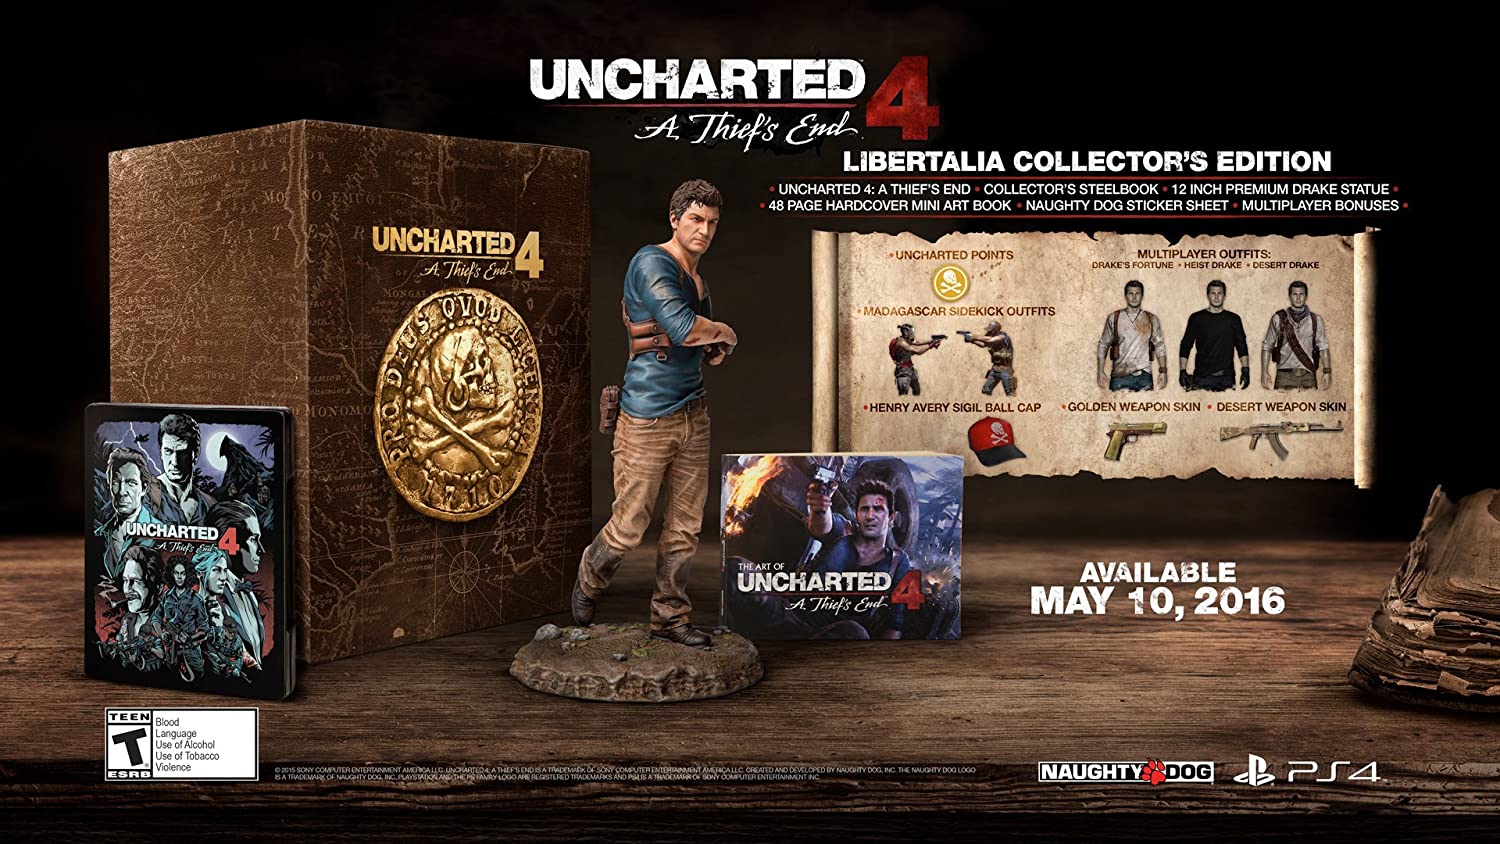 Uncharted 4: A Thief's End (Libertalia Collector's Edition) - (PS4) PlayStation 4 Video Games SCEA   